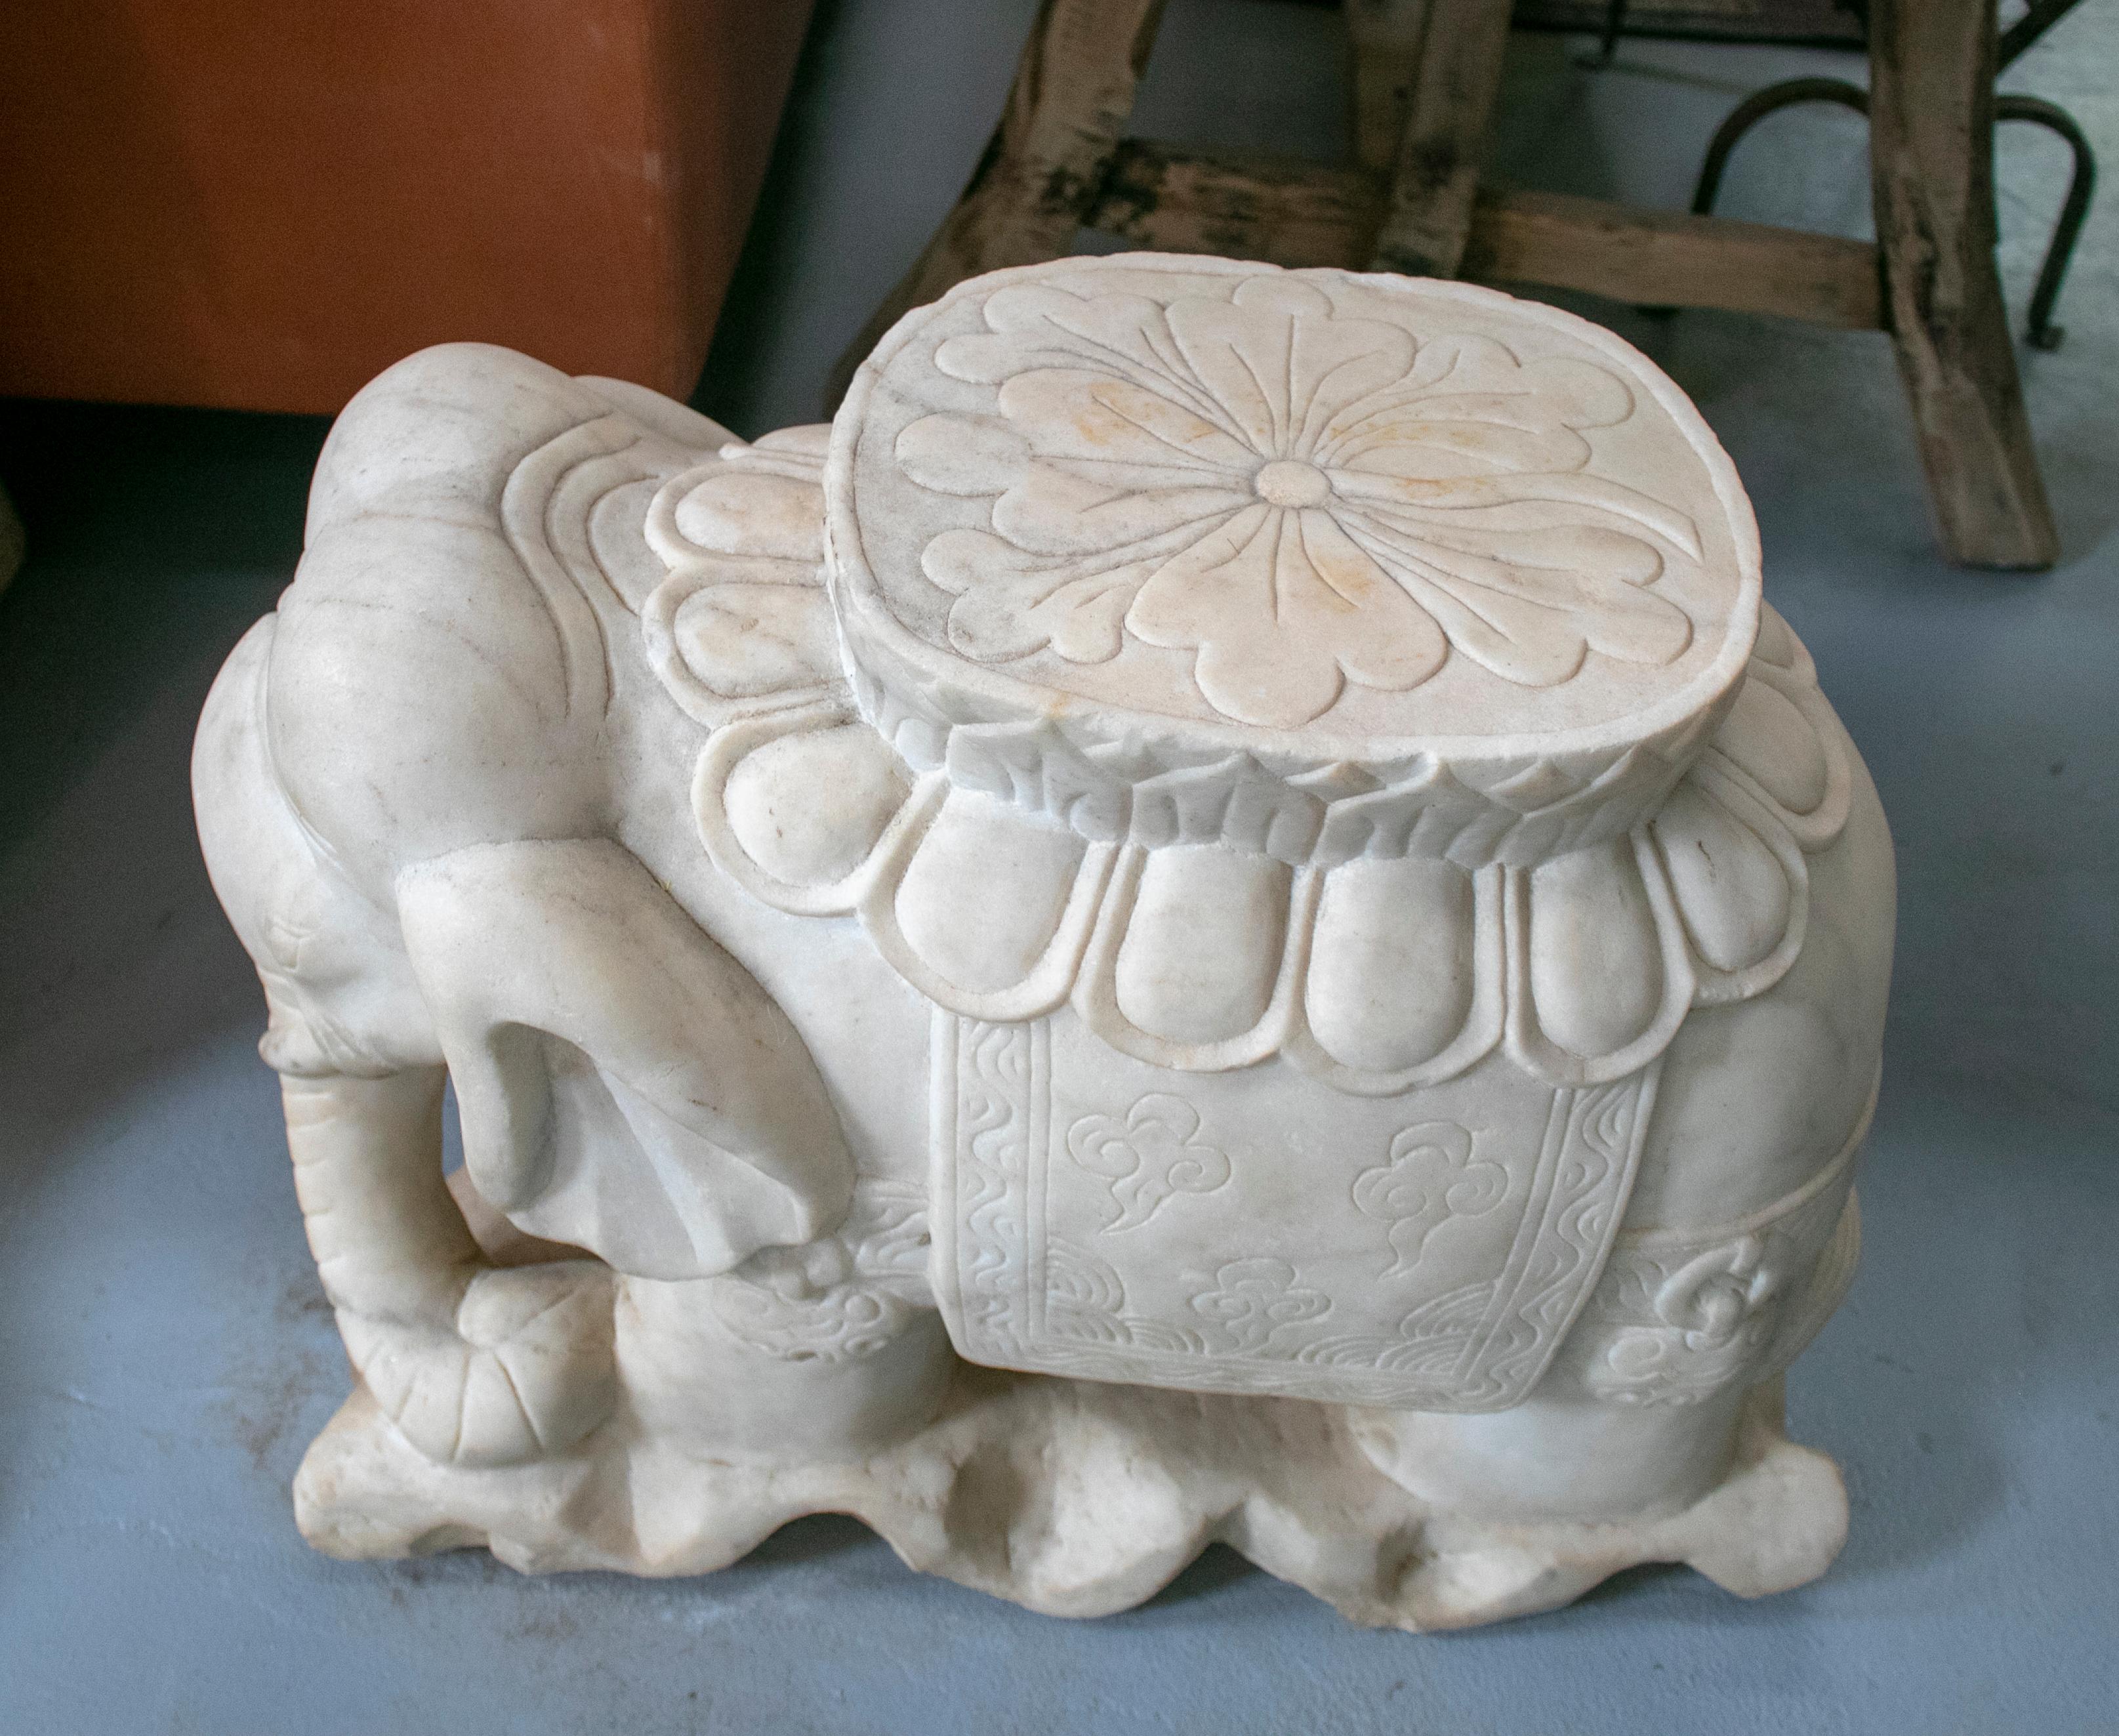 1970s Asian pair of white marble elephants from India.

Dimensions of each.